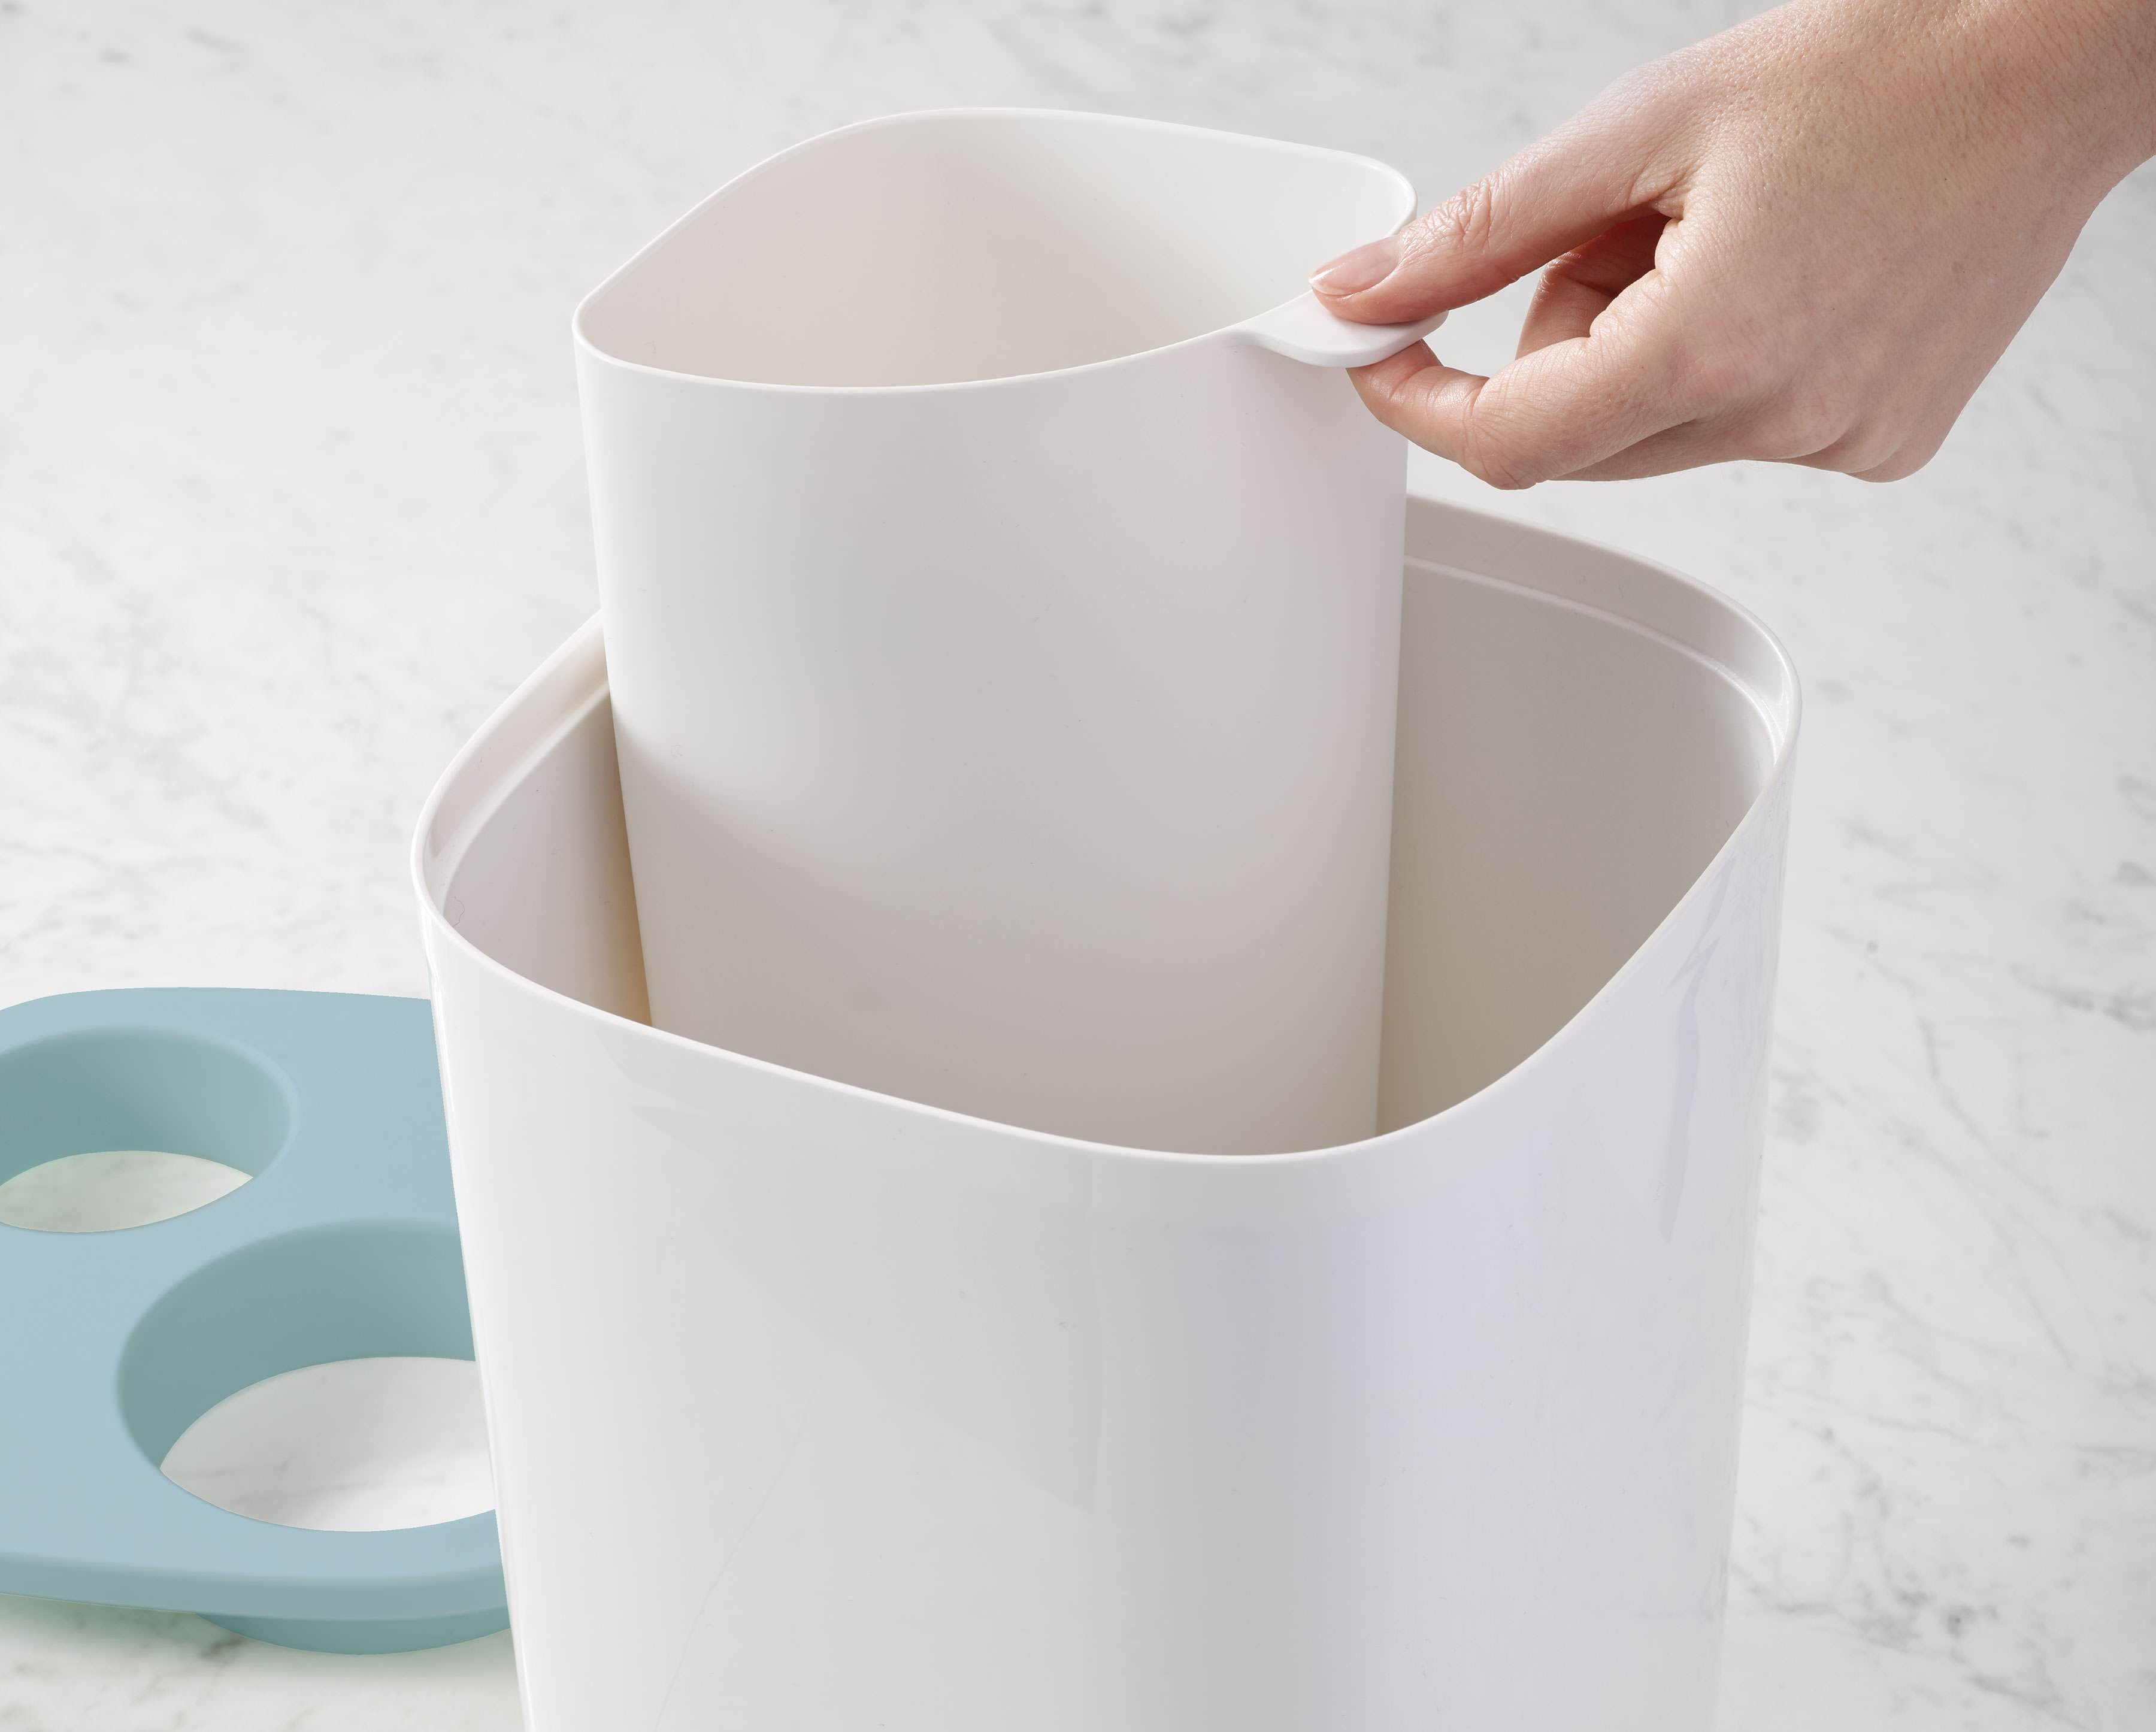 BEON.COM.AU  This handy bathroom bin has two compartments to allow you to split out your waste and recycling in one compact design.  Split compartments allows you to separate recyclable and non-recyclable waste Removable inner bucket for easy emptying Use with or without a plastic liner Easy to clean Total c... Joseph Joseph at BEON.COM.AU